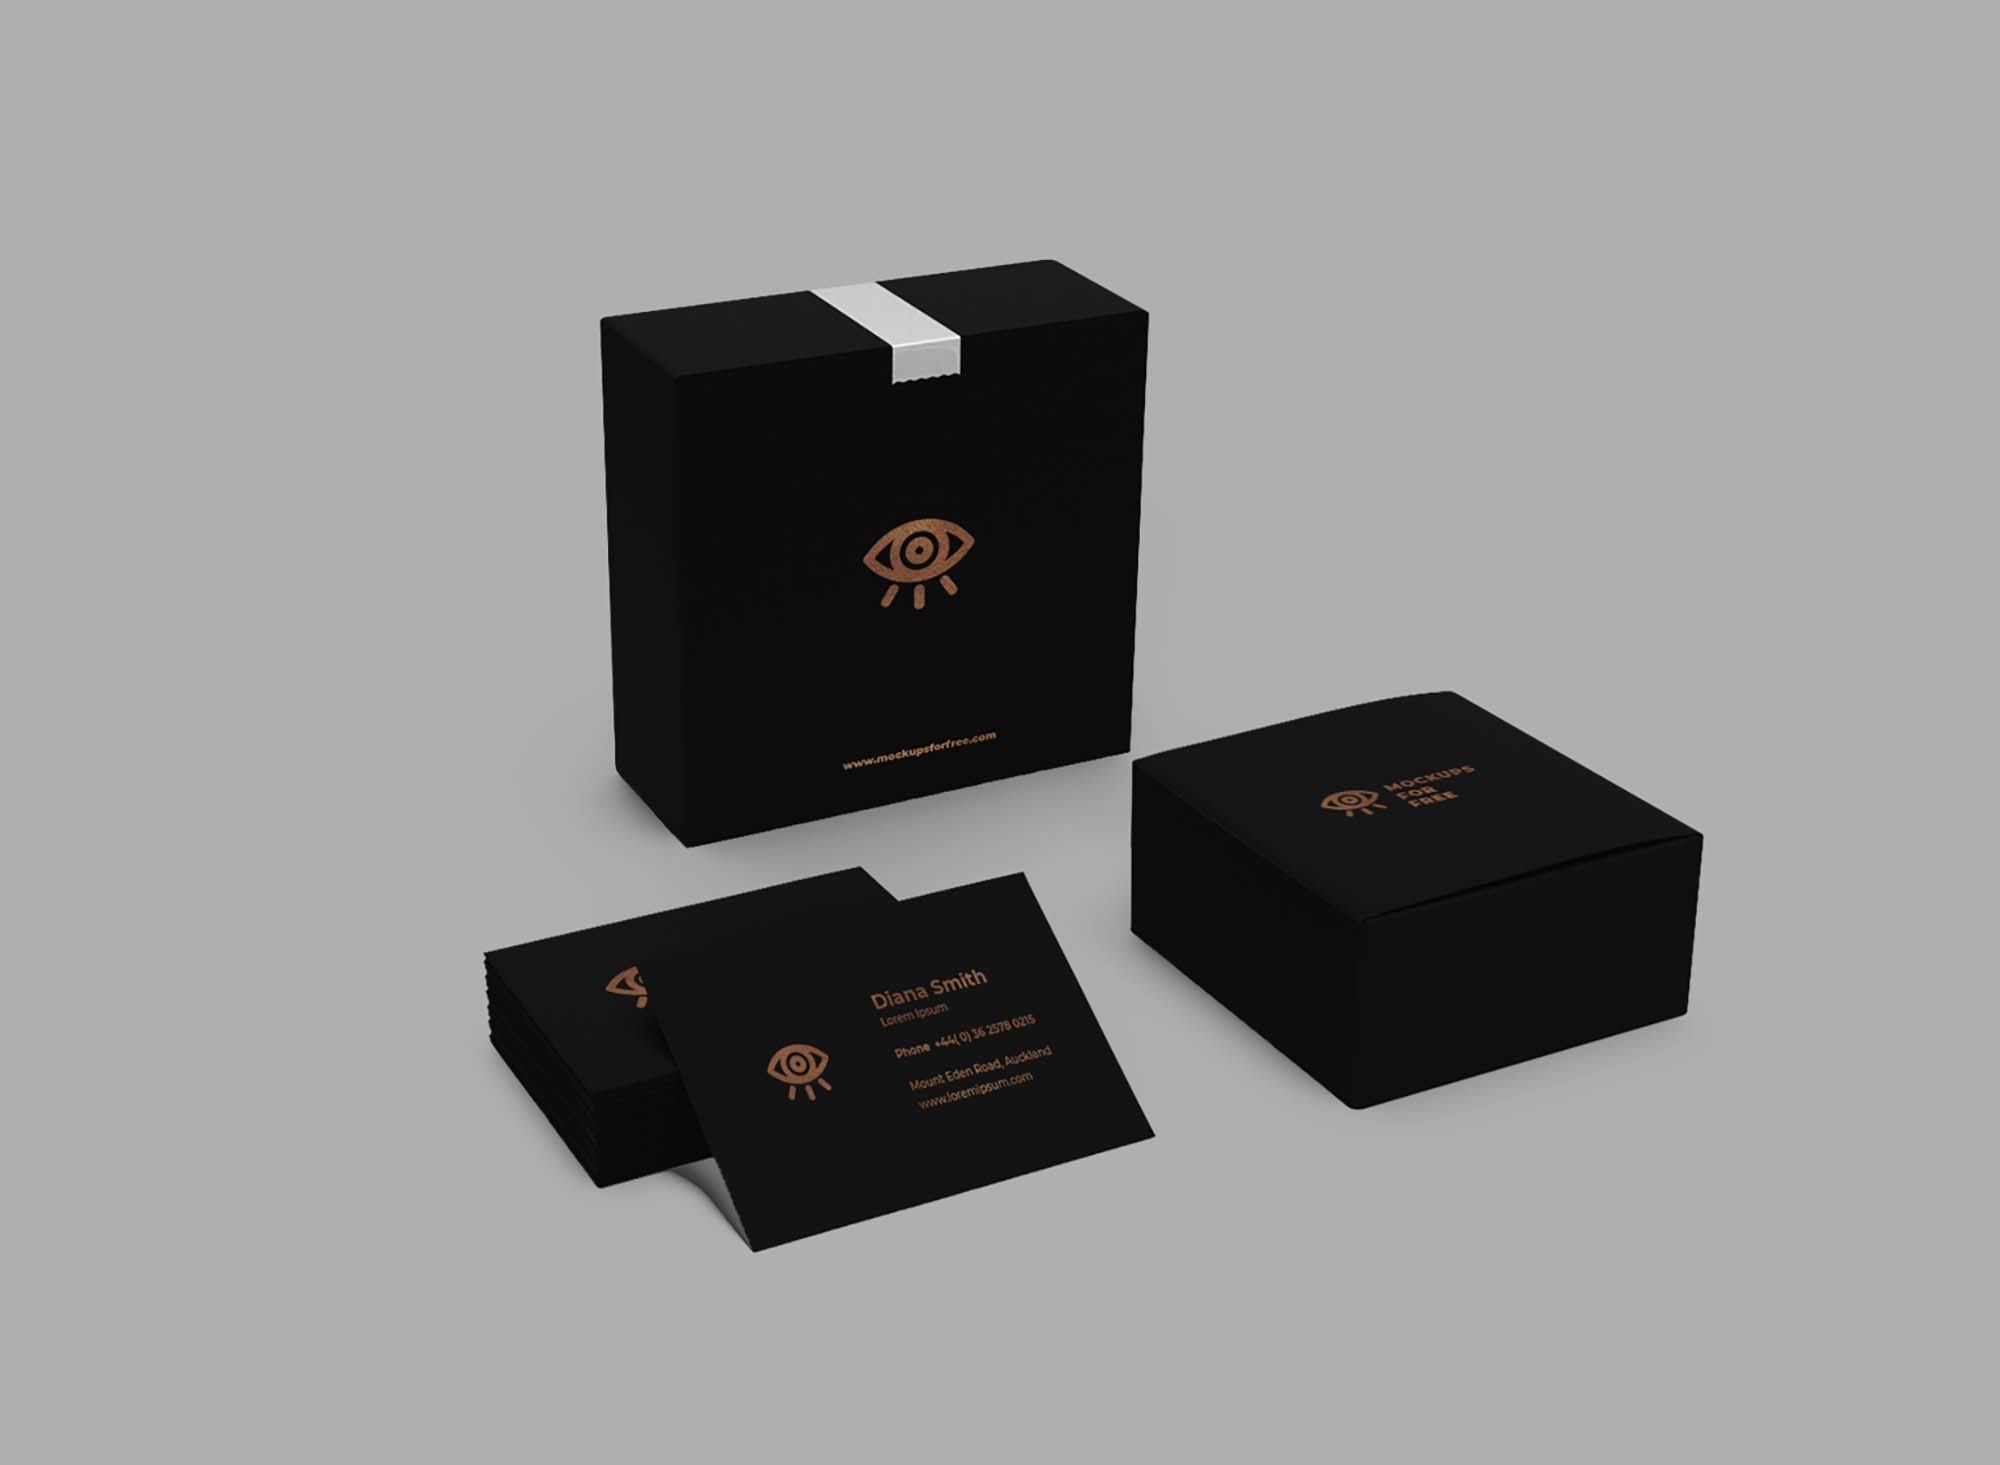 Download Corporate Black Boxes PSD Mockup (Free) by Rebecca Diack